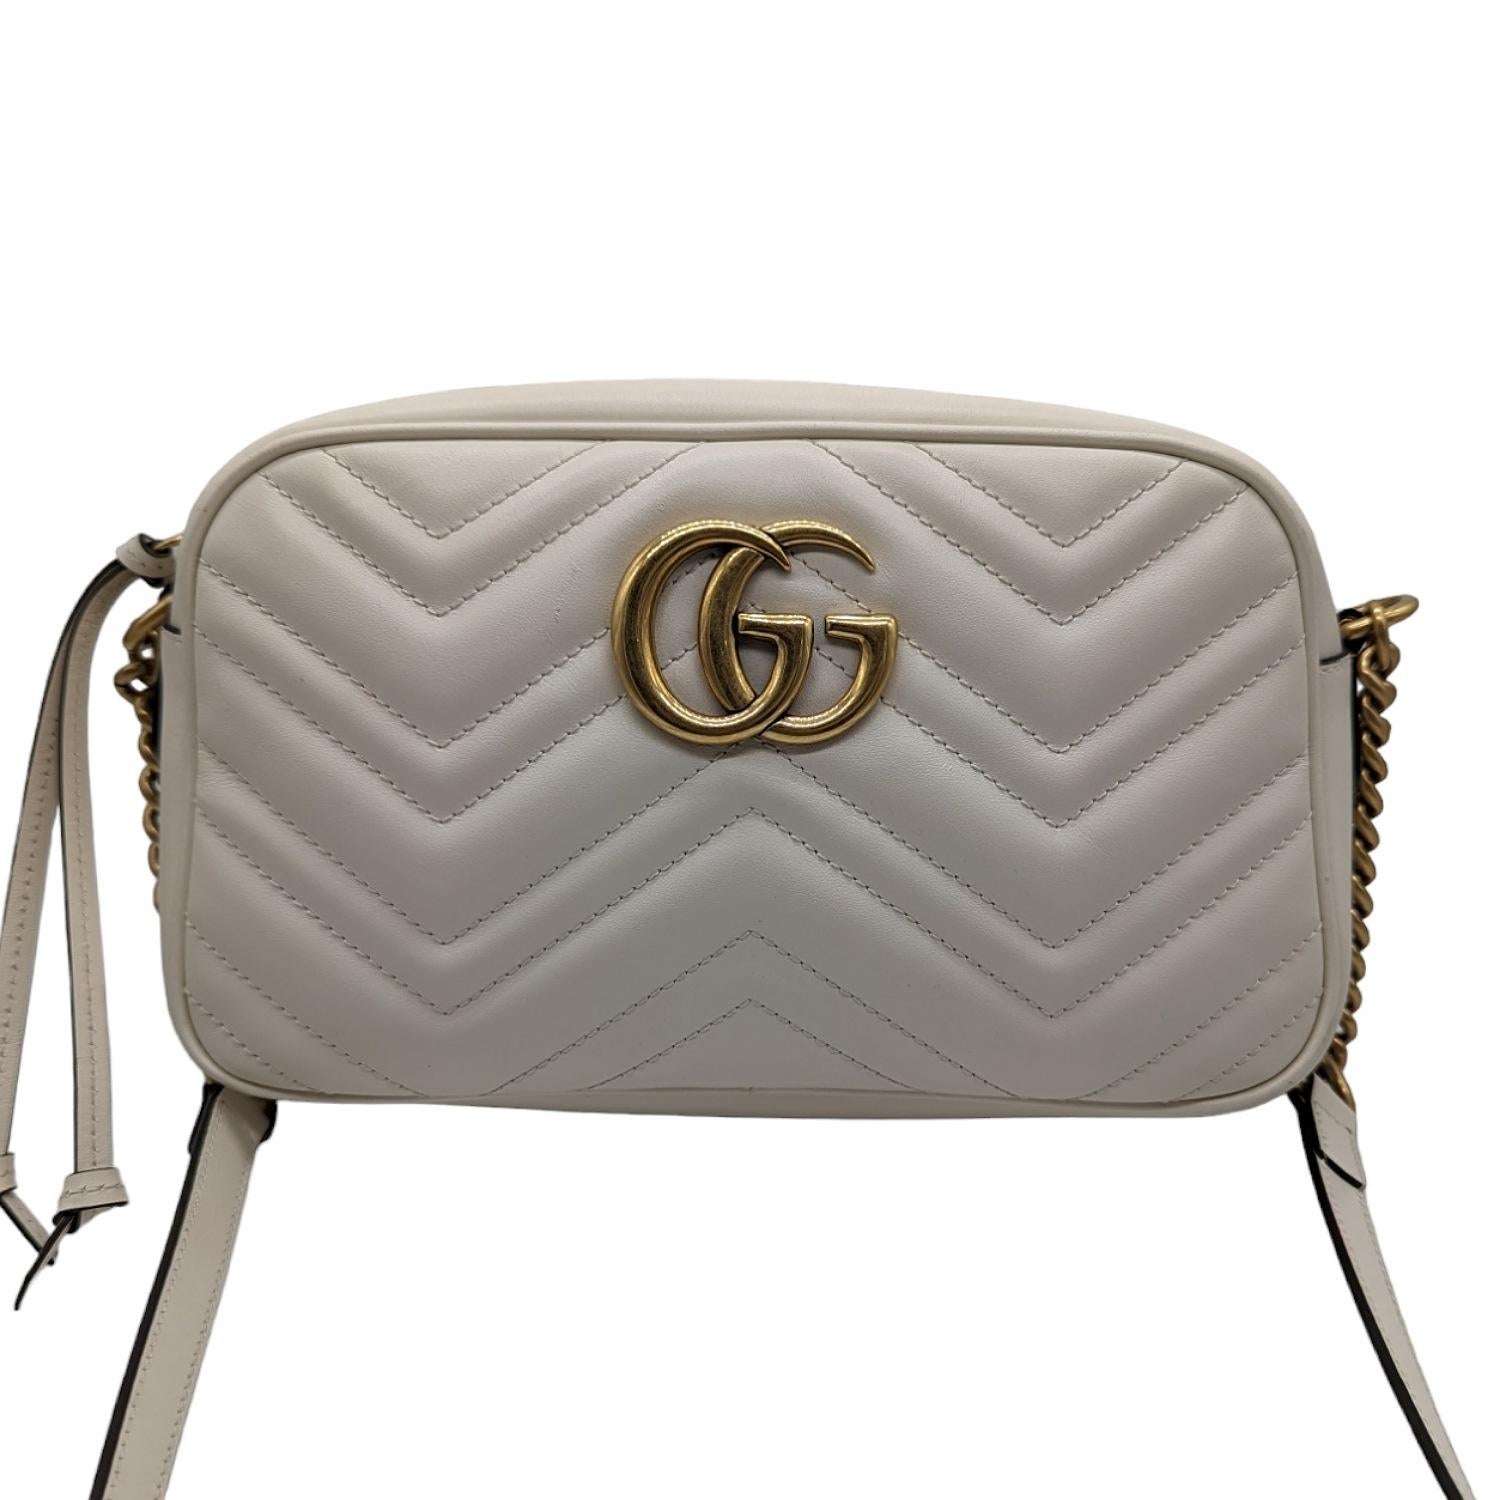 Gucci White Small GG Marmont Shoulder Bag In Excellent Condition For Sale In Scottsdale, AZ